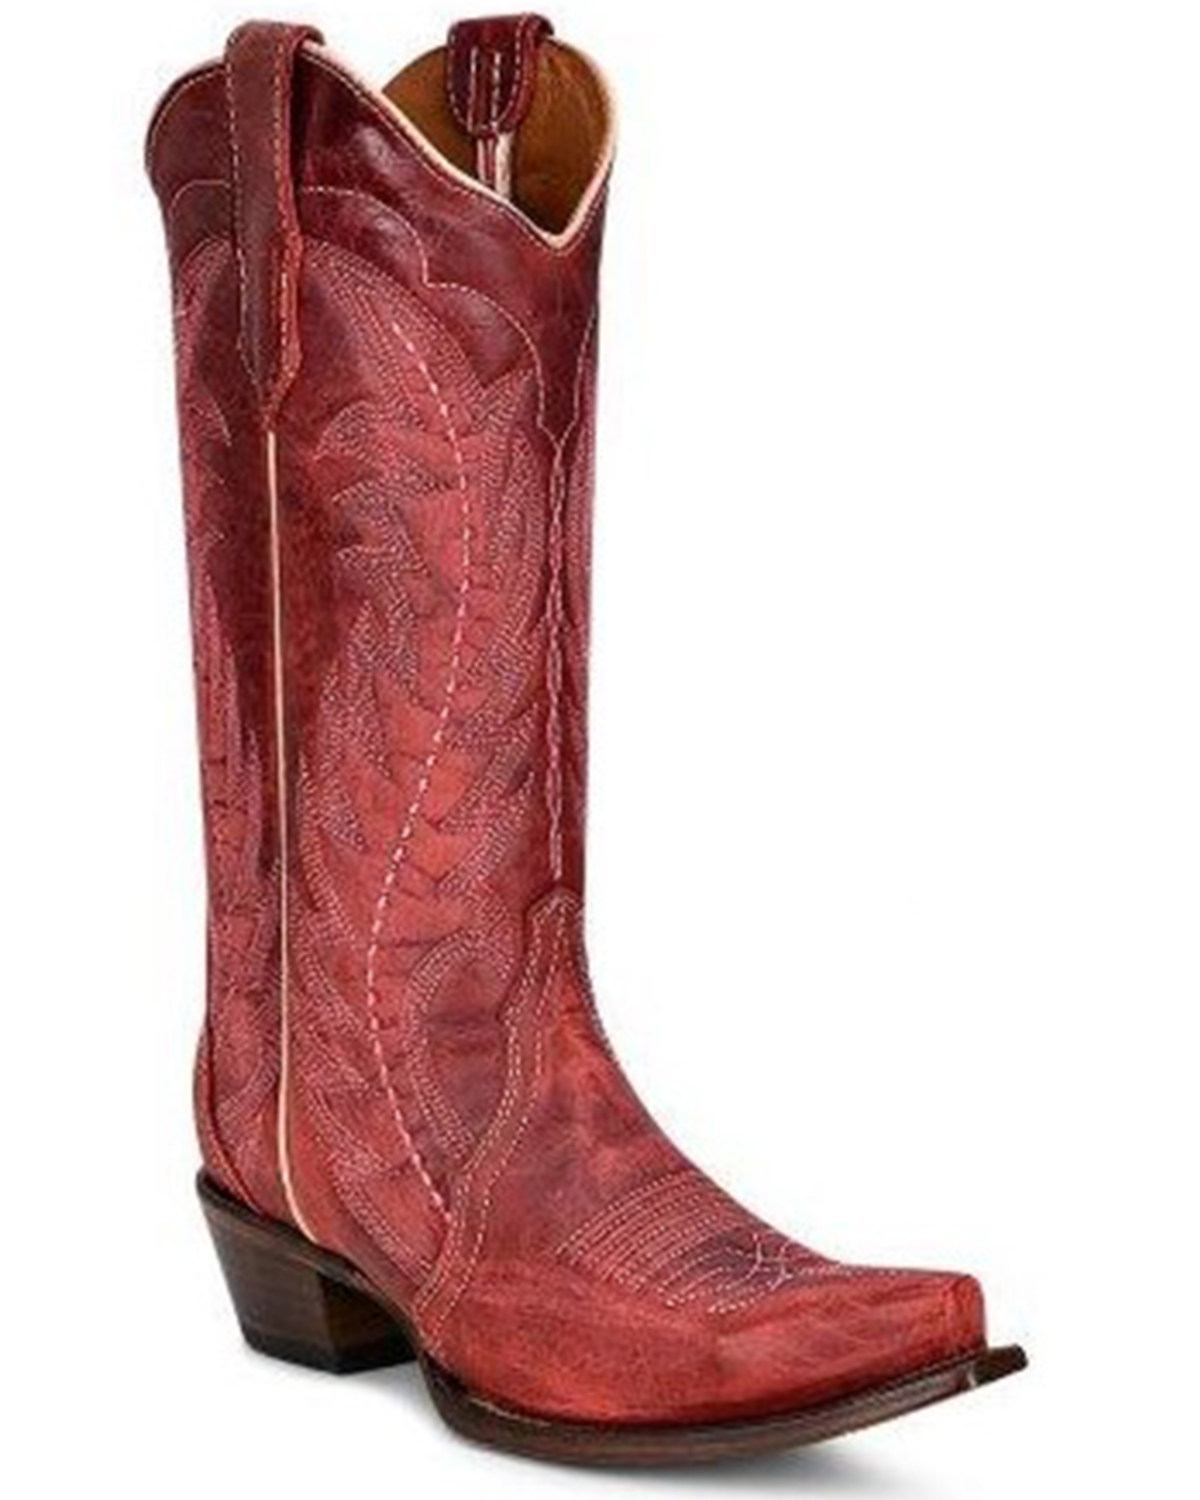 Corral Women's Embroidered Western Boots - Snip Toe